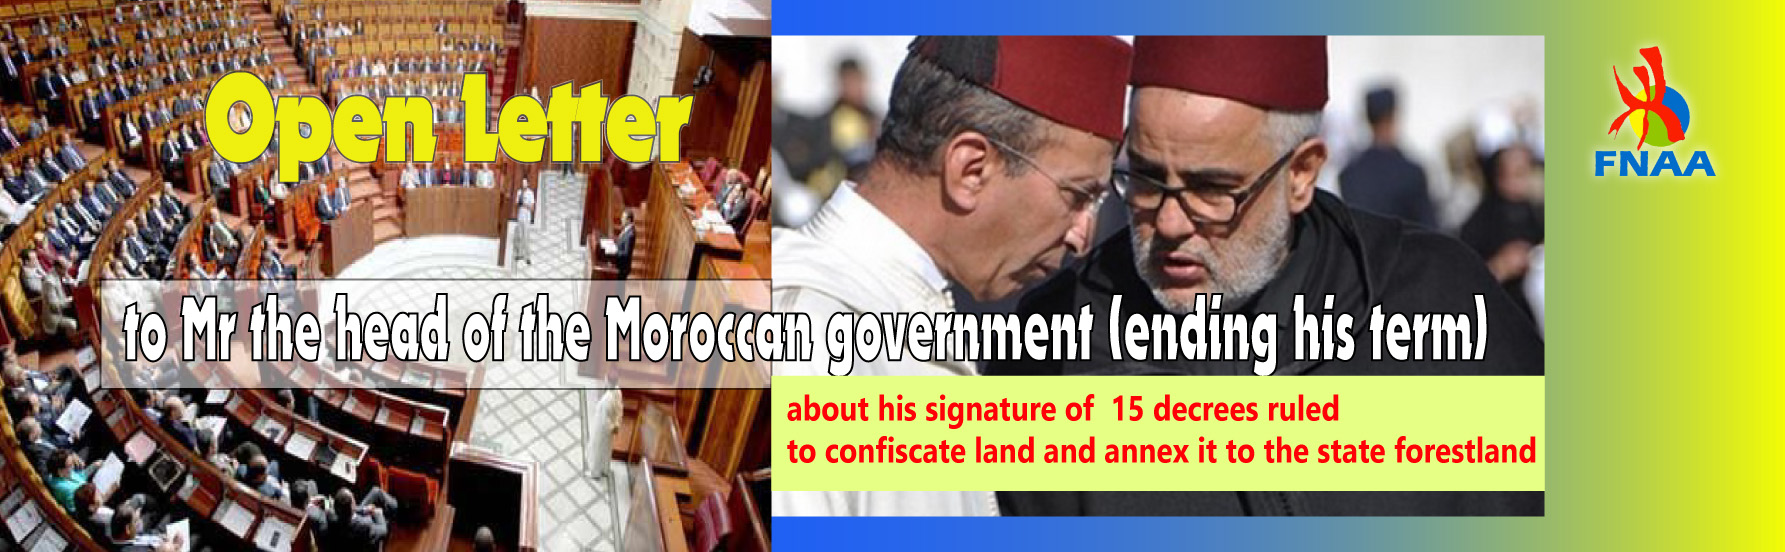 Open Letter to Mr the head of the Moroccan government (ending his term) about his signature of  15 decrees ruled to confiscate land and annex it to the state forestland